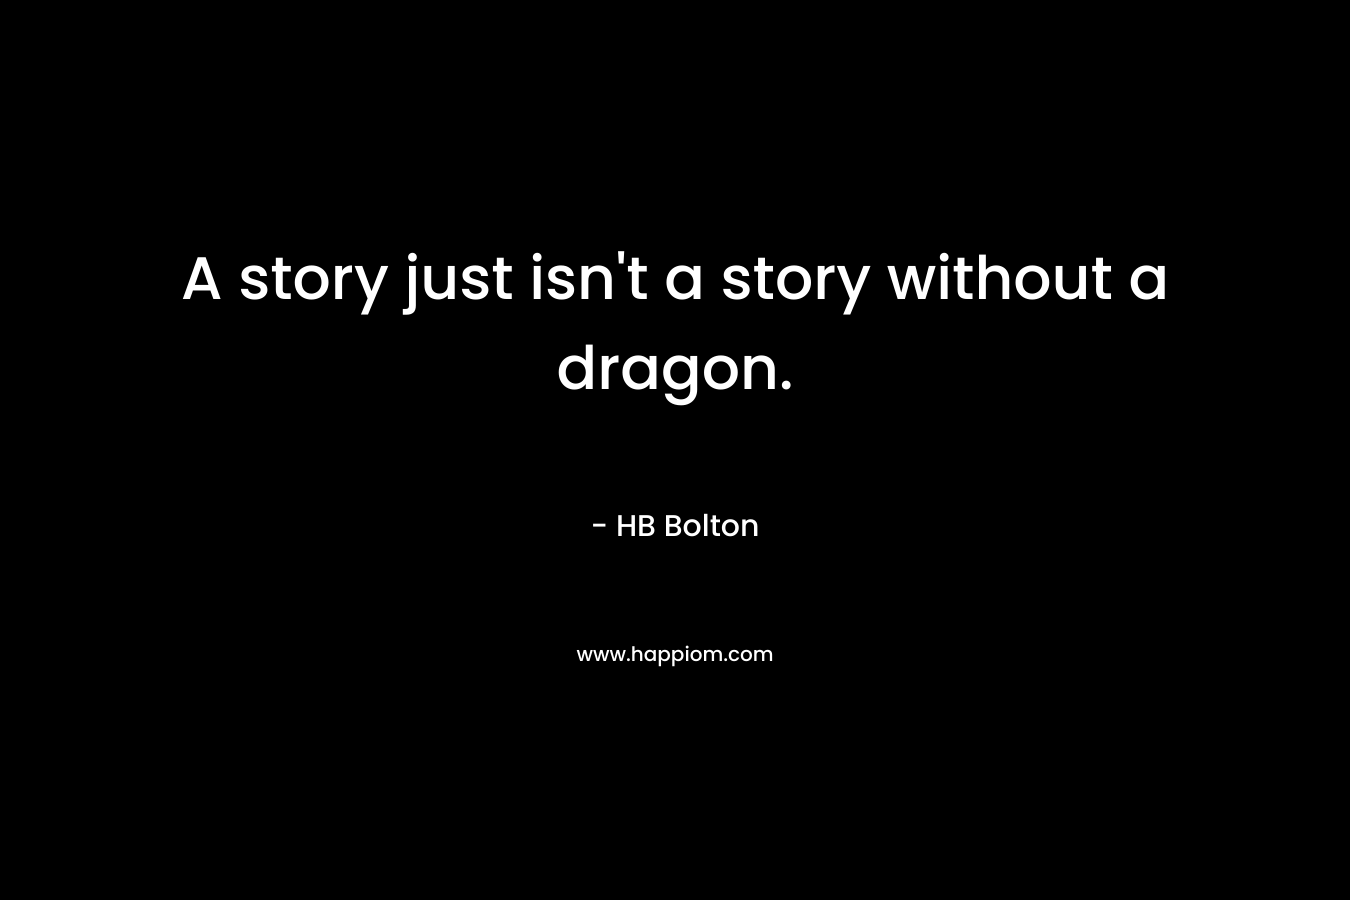 A story just isn’t a story without a dragon. – HB Bolton